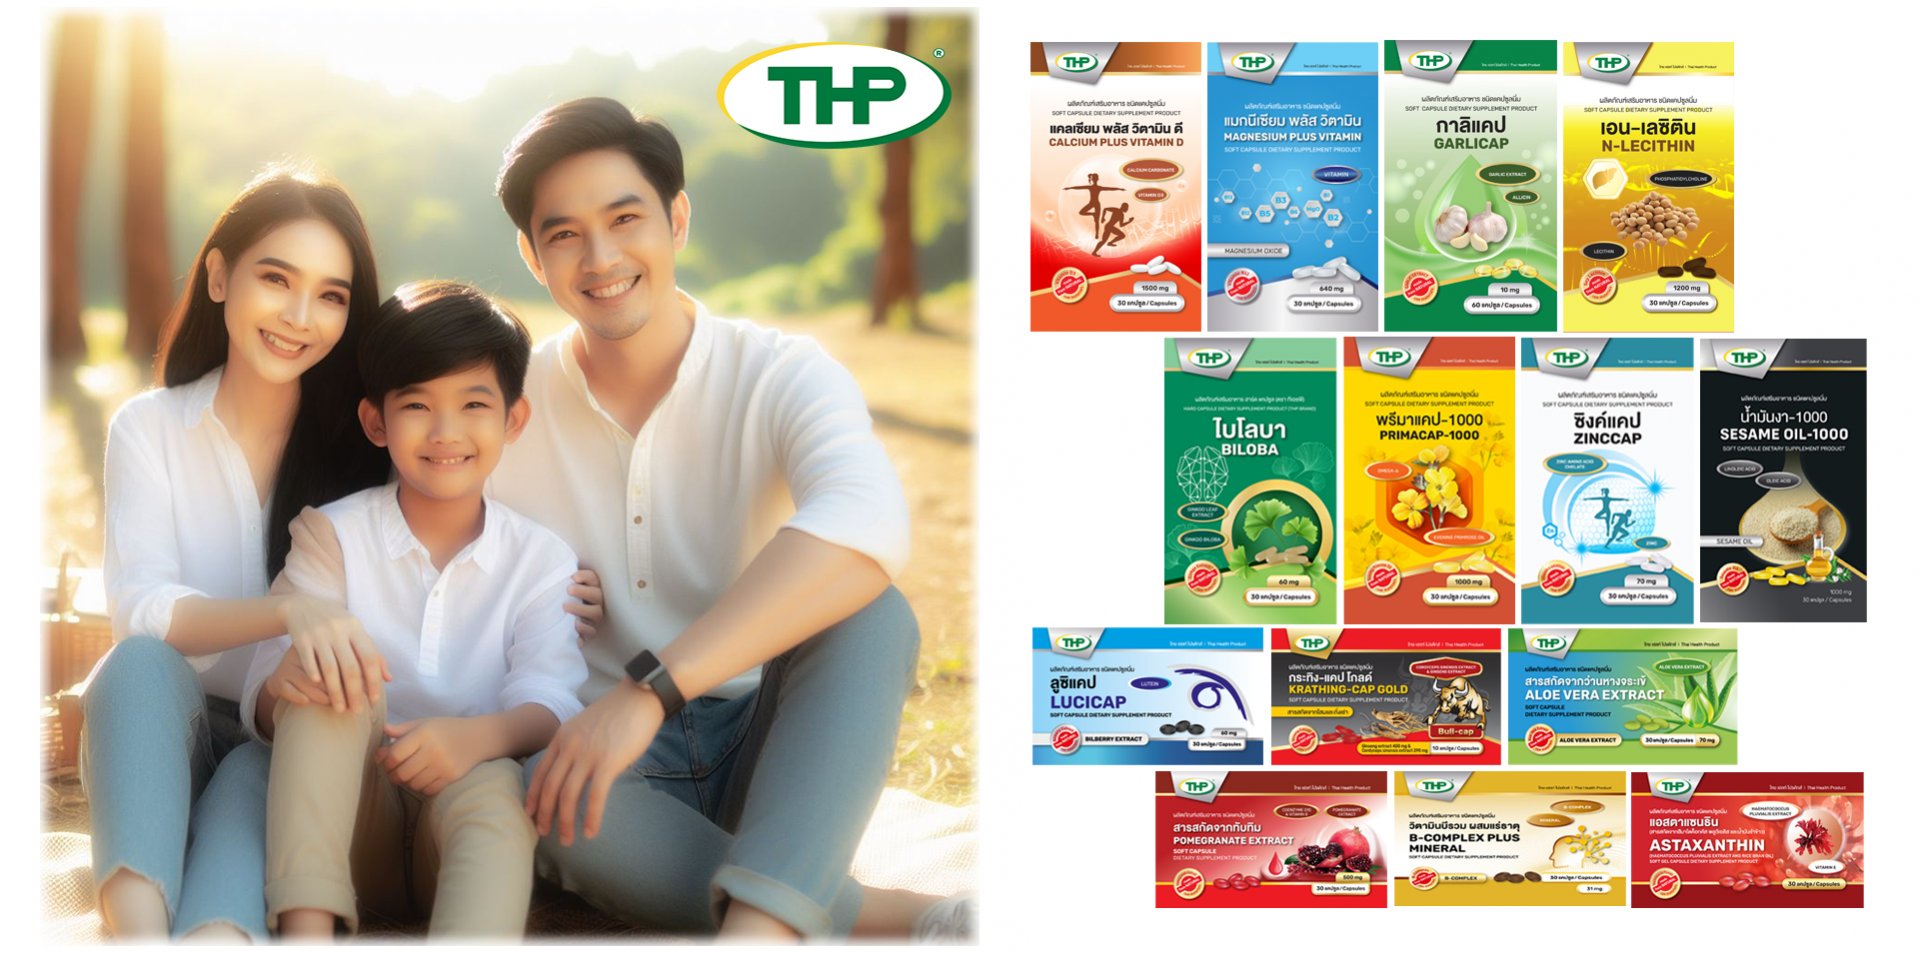 THP New Package